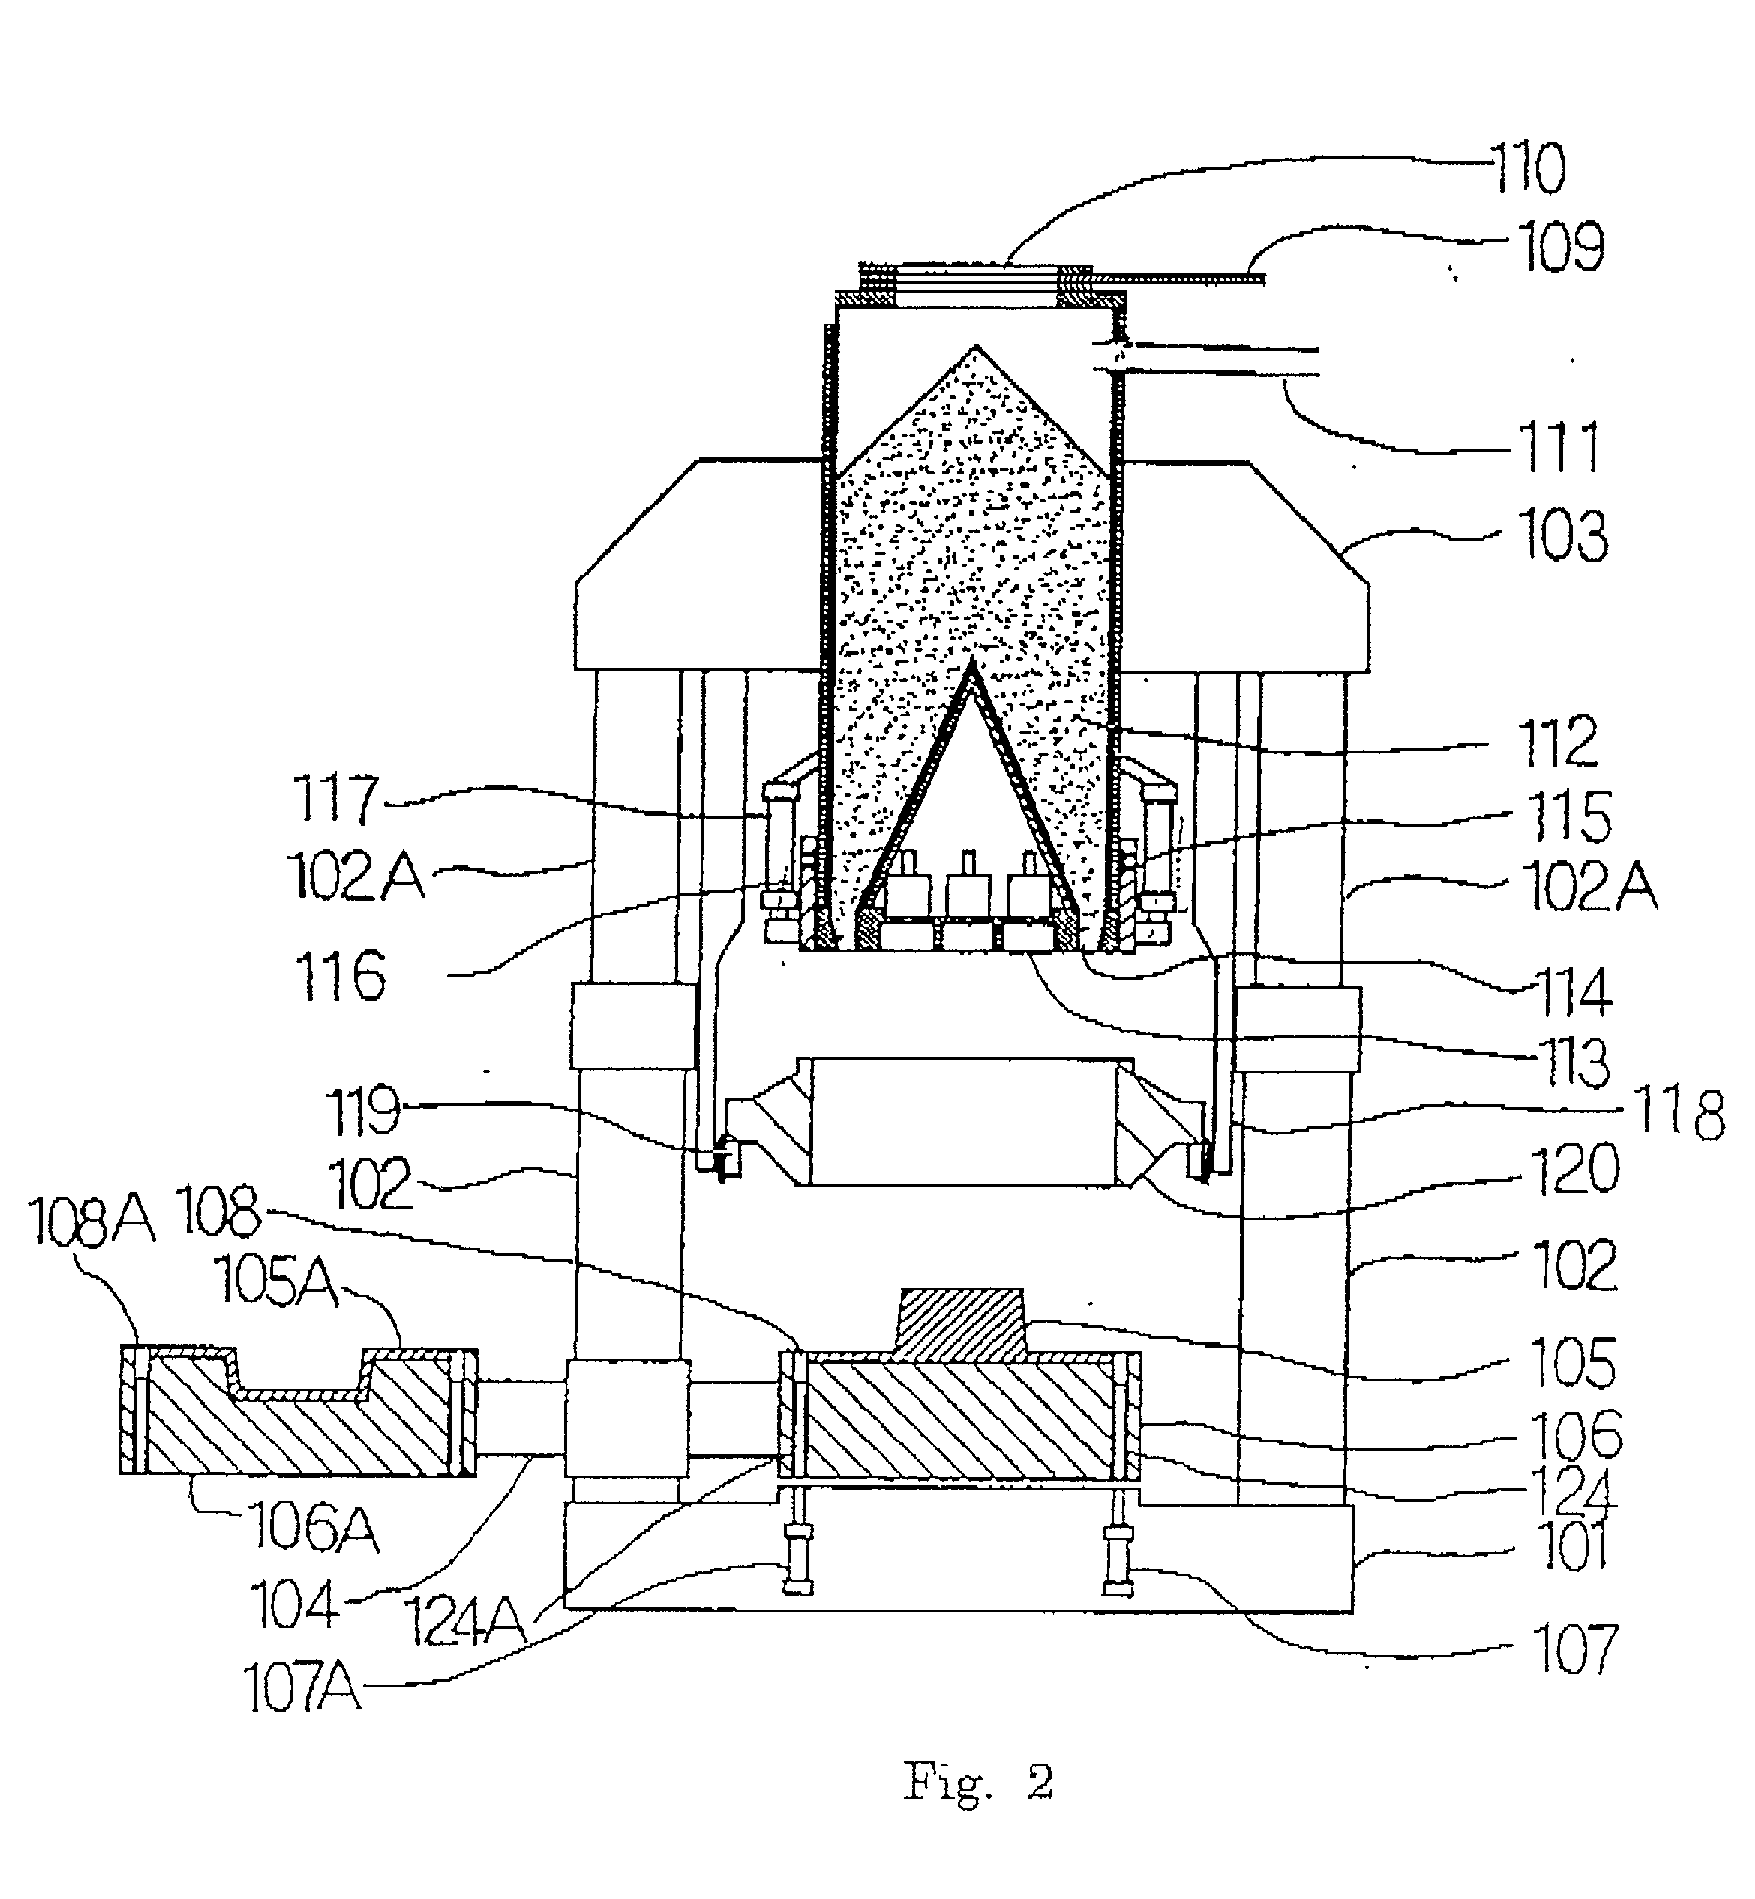 Method and apparatus for compacting molding sand